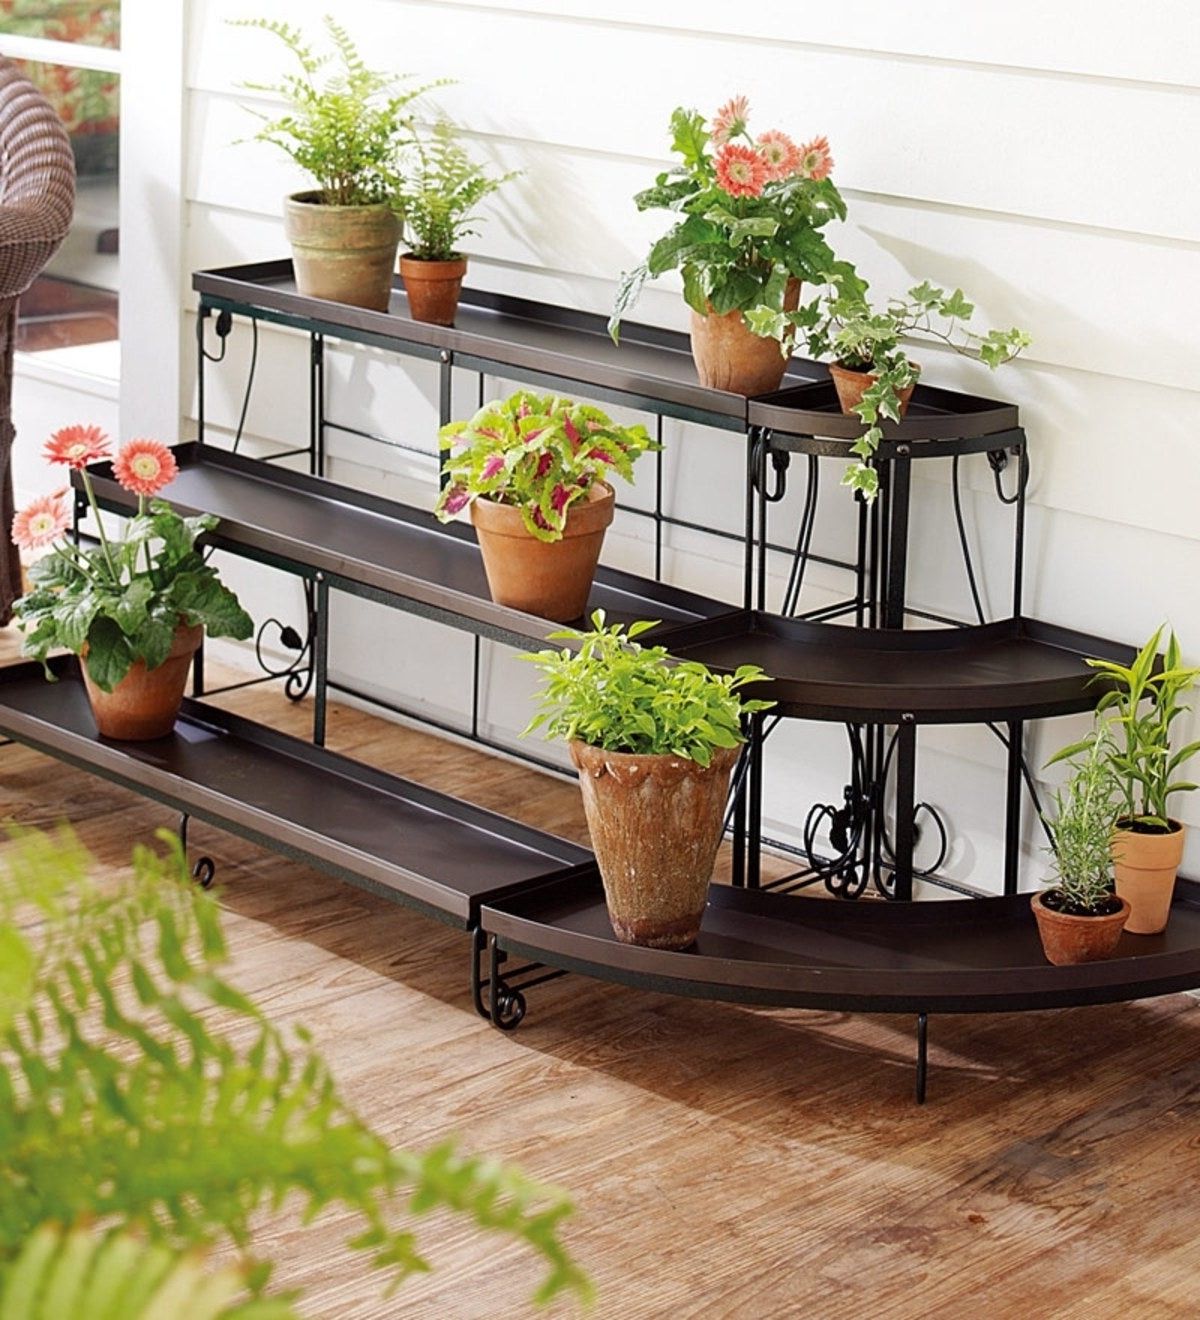 Fashionable Metal Tiered Plant Stand – Ideas On Foter Intended For Metal Plant Stands (View 8 of 10)